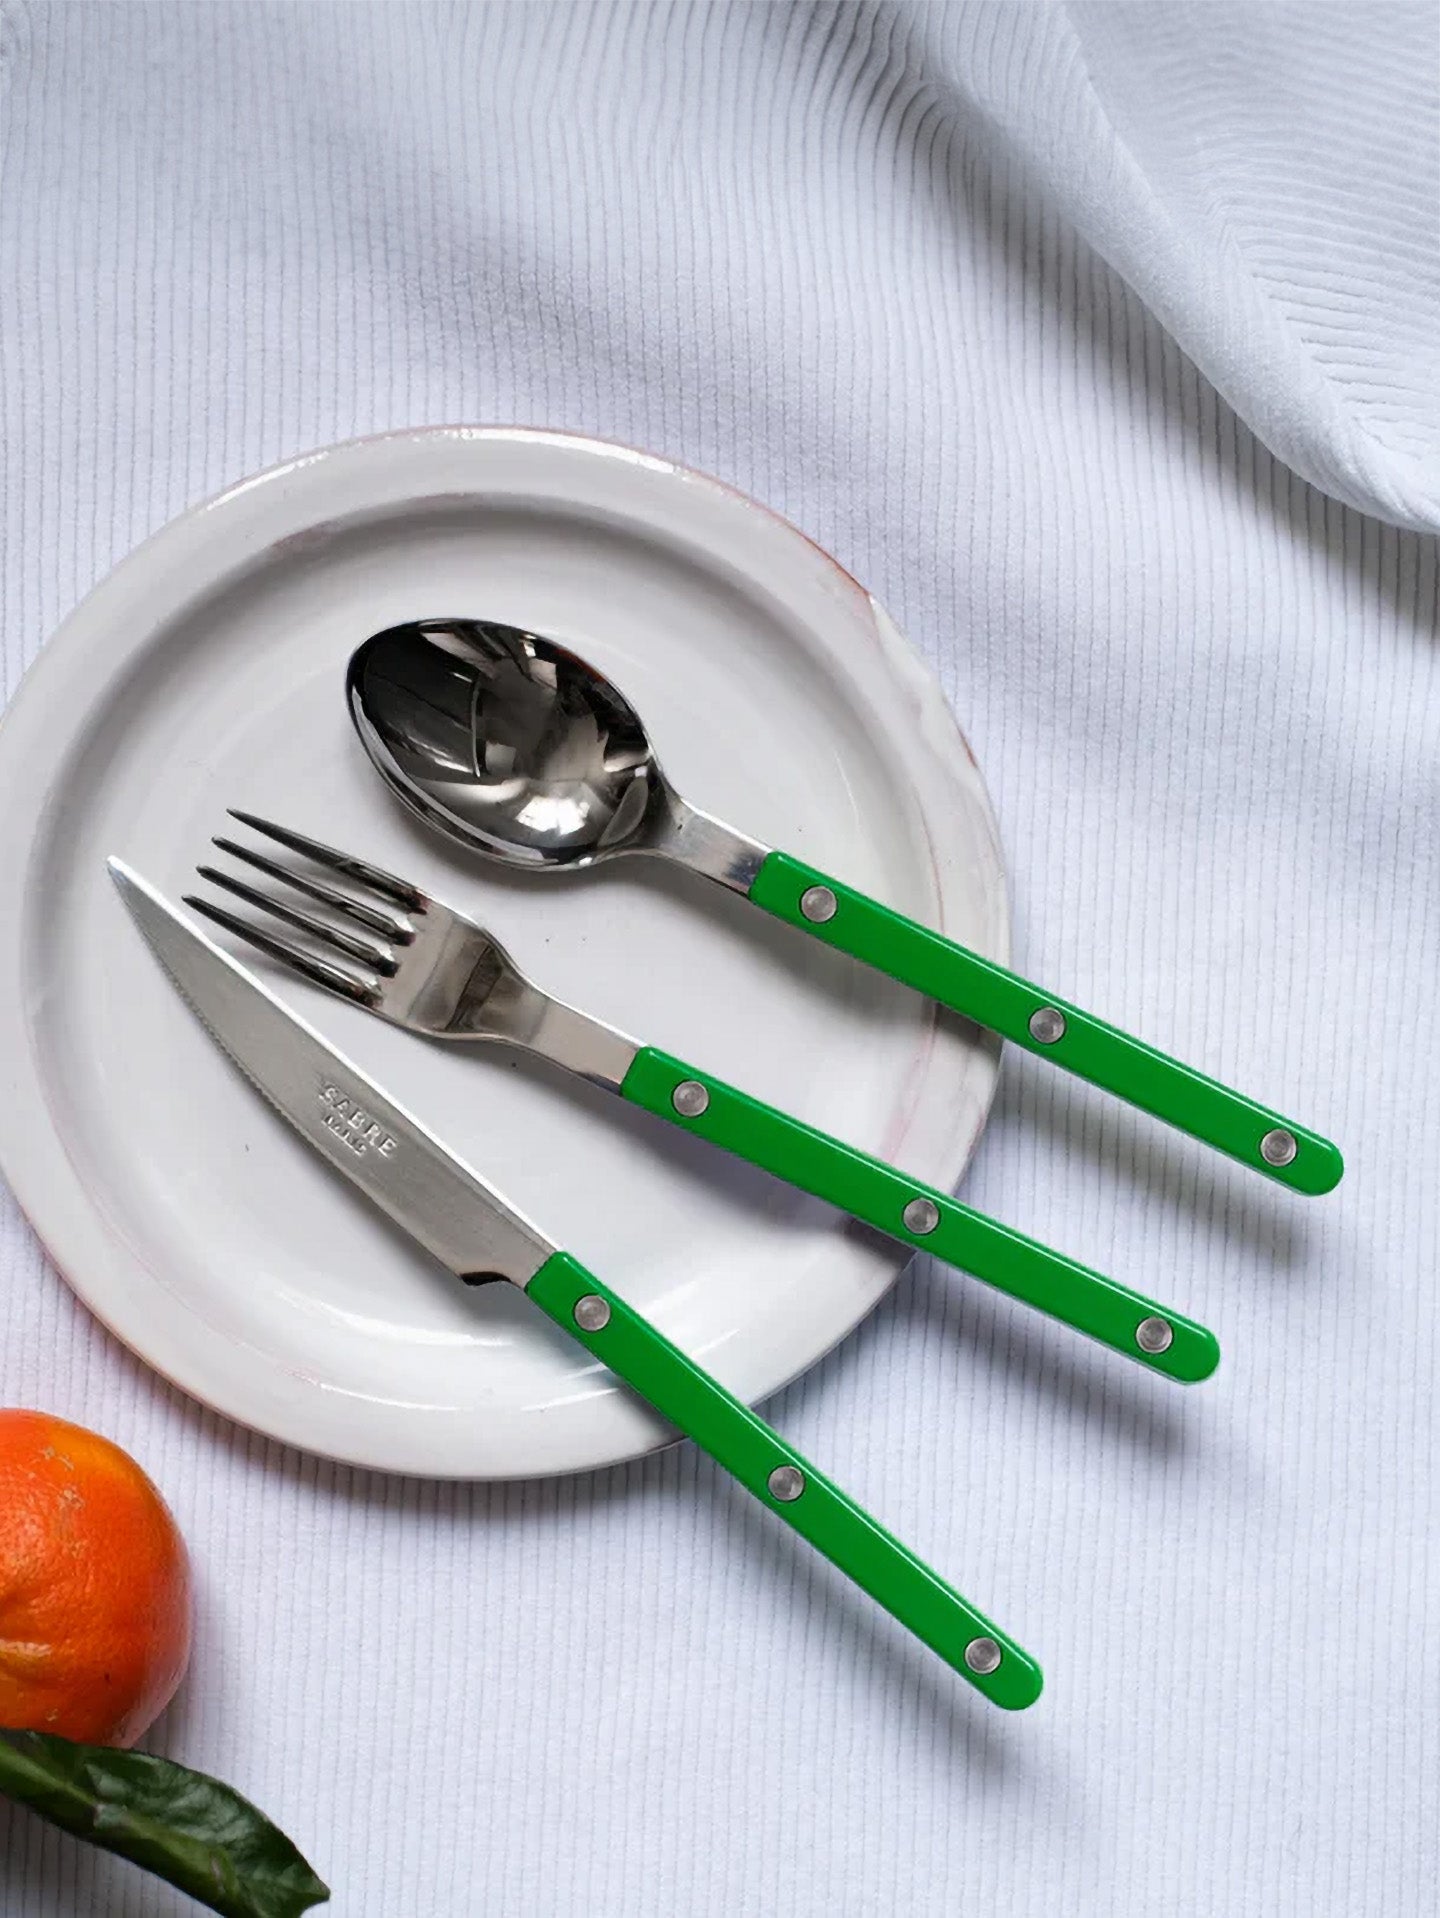 The garden green Bistrot dinner fork could be paired up with the dinner knife and the soup spoon of the same series.